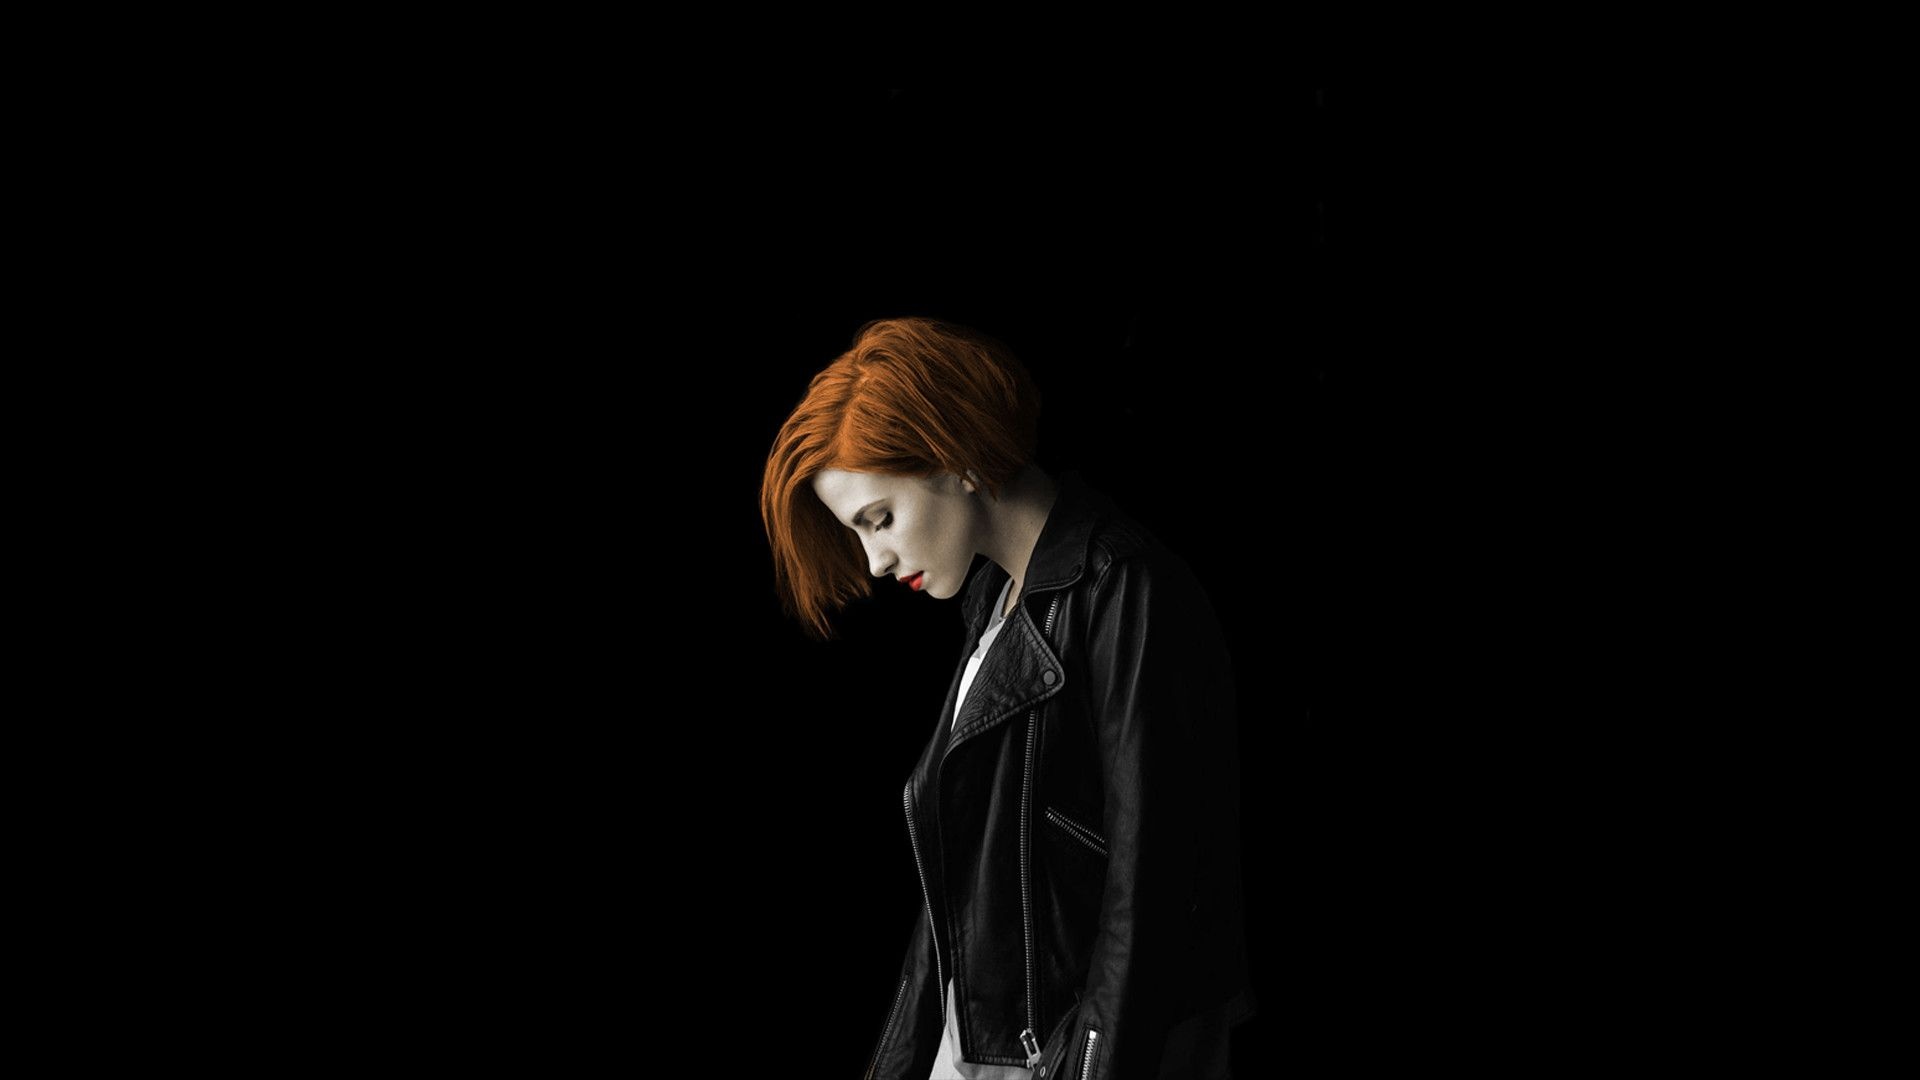 Paramore: The vibrant singer, ‘Decode’, The lead single for the movie ‘Twilight’. 1920x1080 Full HD Wallpaper.